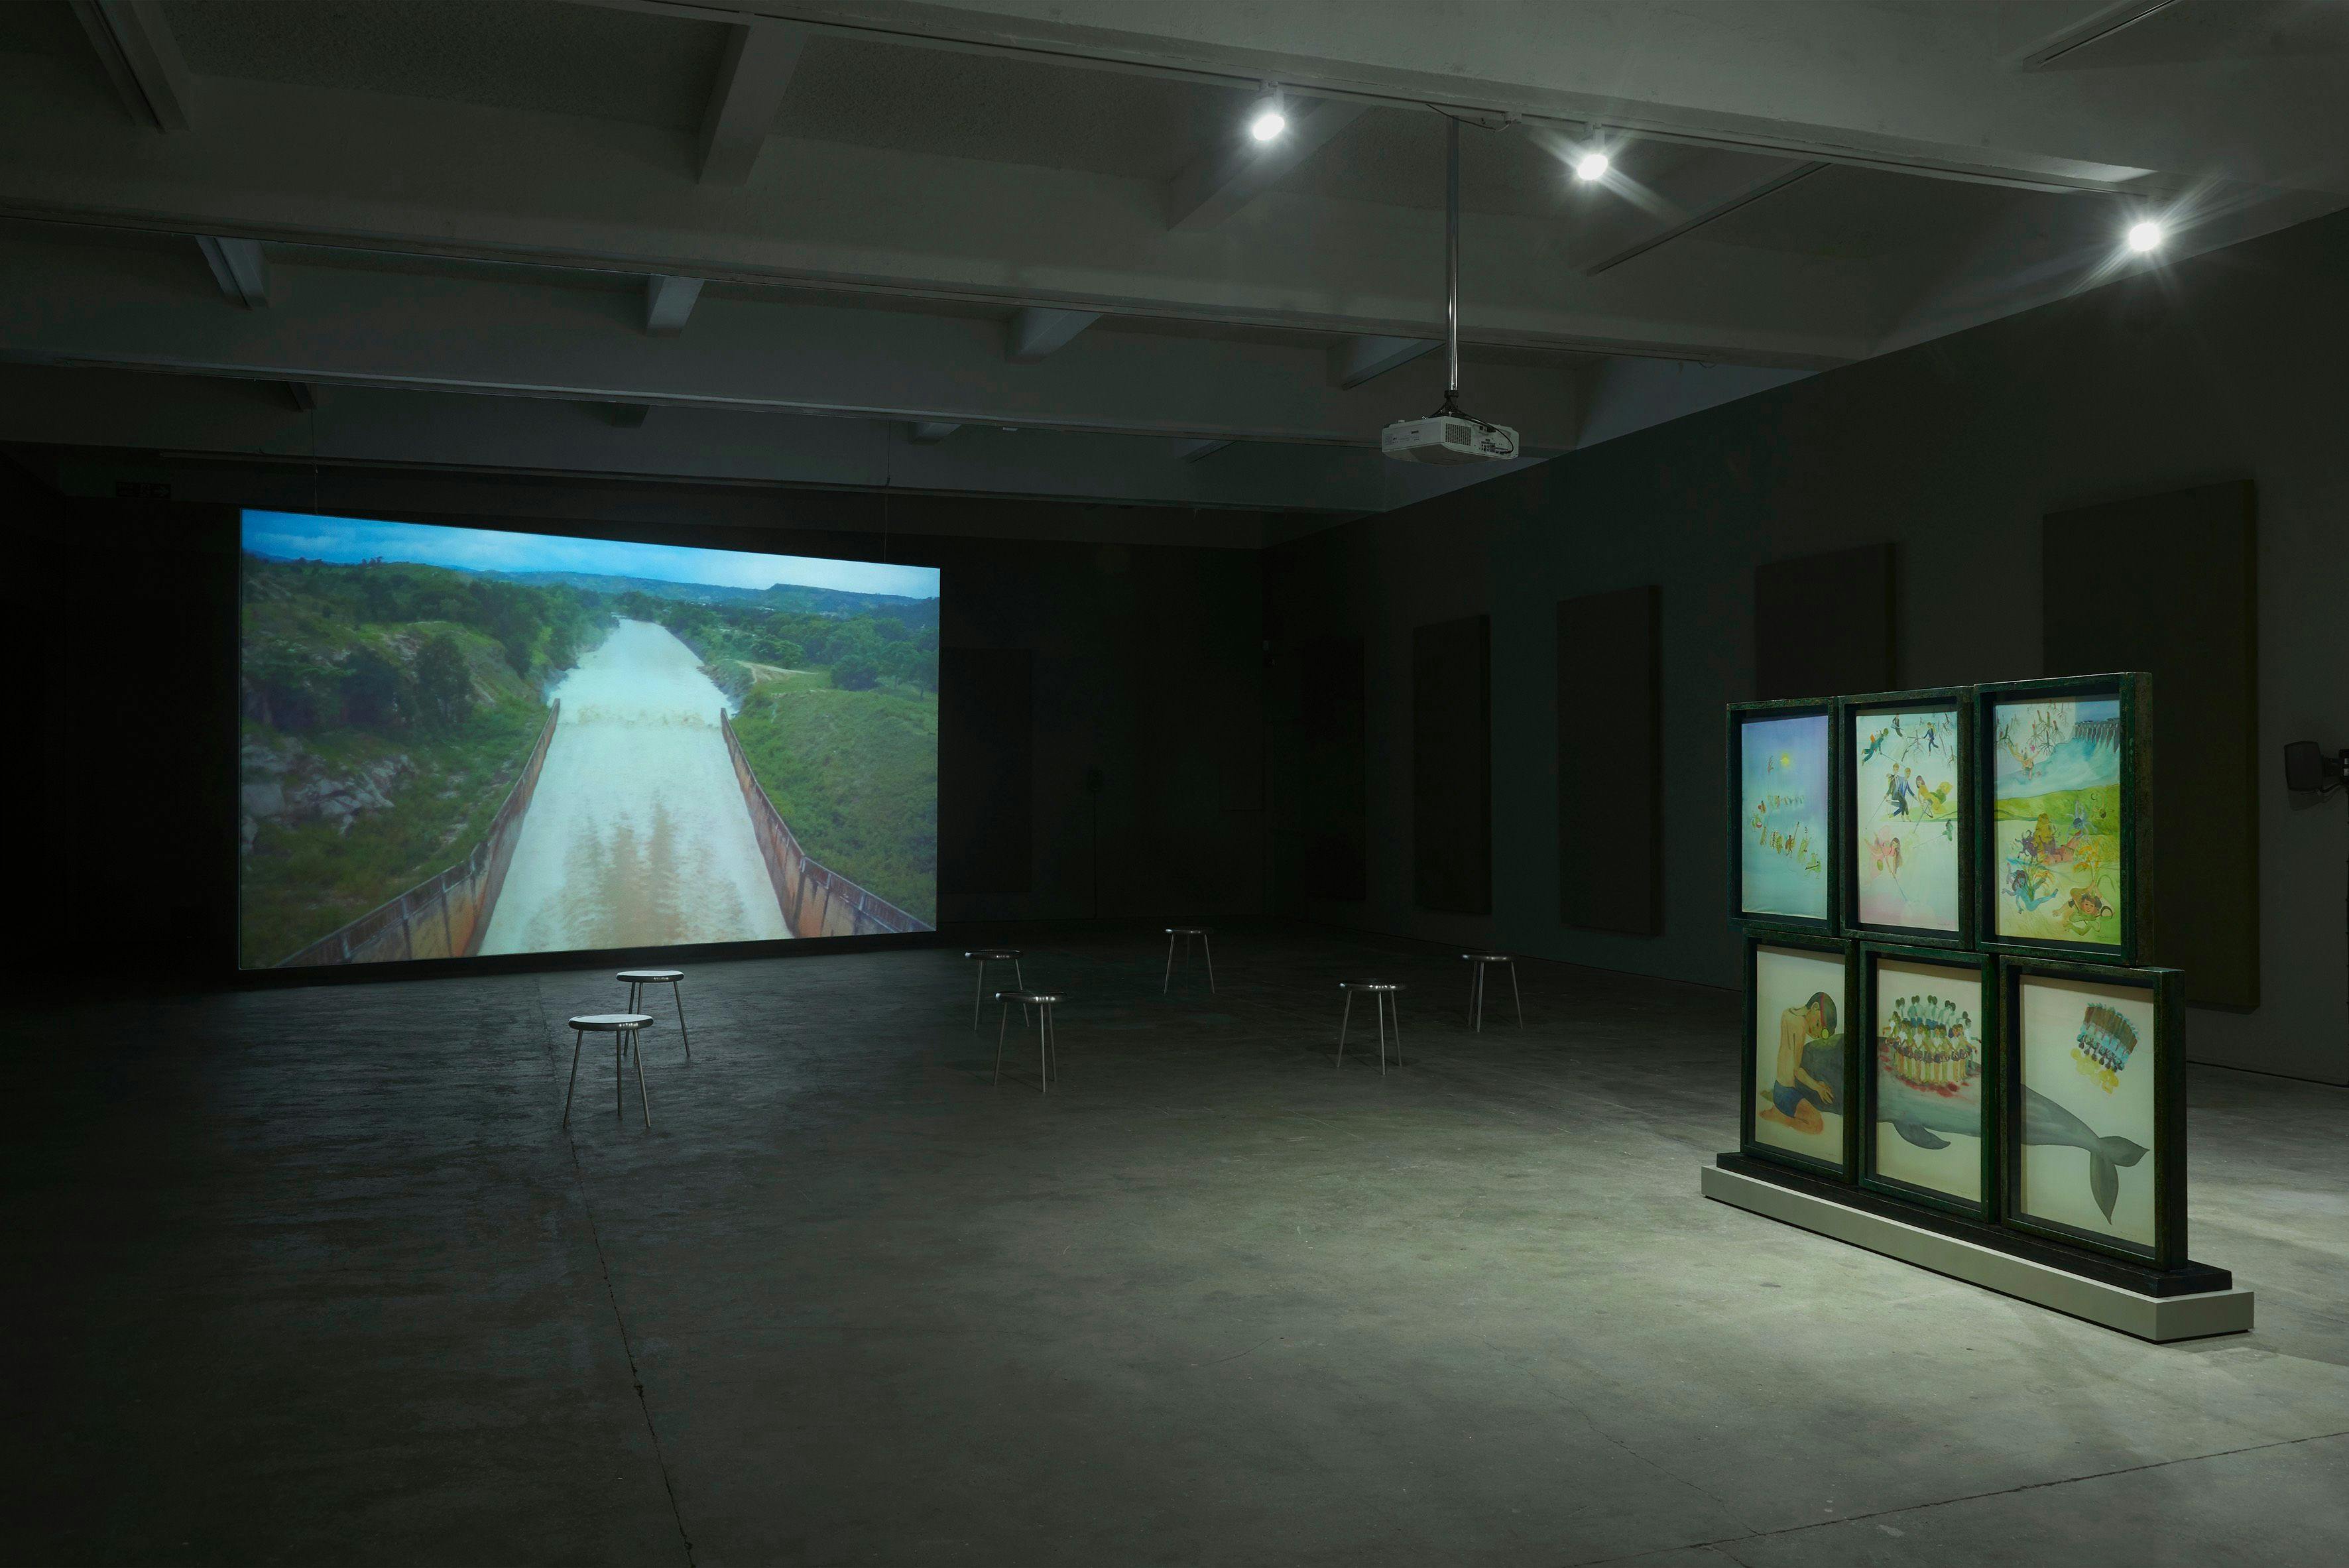 Image of a gallery space with a large screen on the left and six smaller screens pushed together on the right. There are lots of stools dotted around the space.